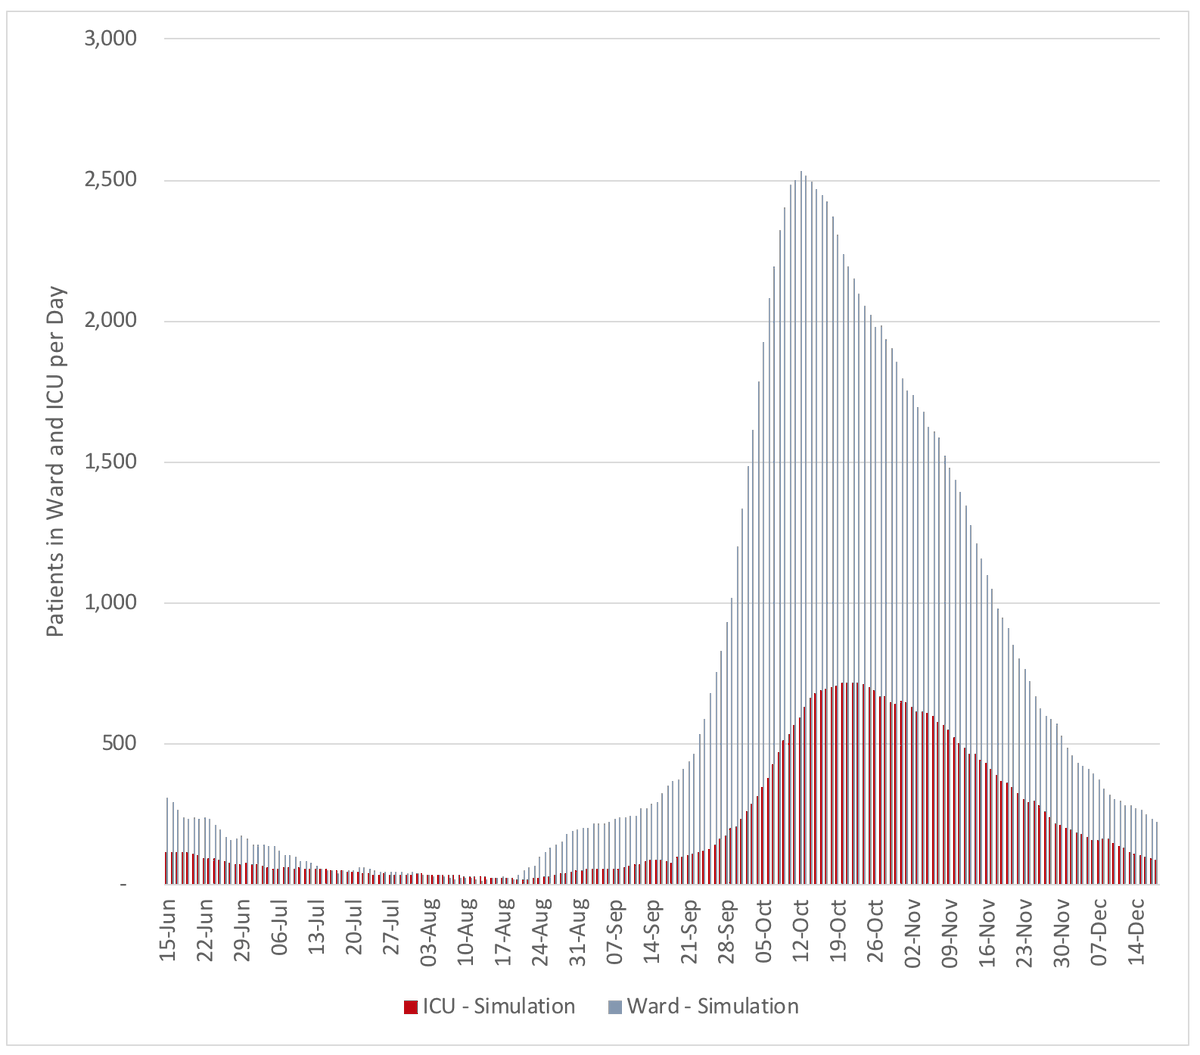 8/ Our “worst” case scenario (epidemic curve like Italy’s first wave and a high rate of hospitalization among cases) shows a peak of new cases in early-mid October, with >2000 patients in wards and >600 patients in ICUs. This would overwhelm our hospital system.